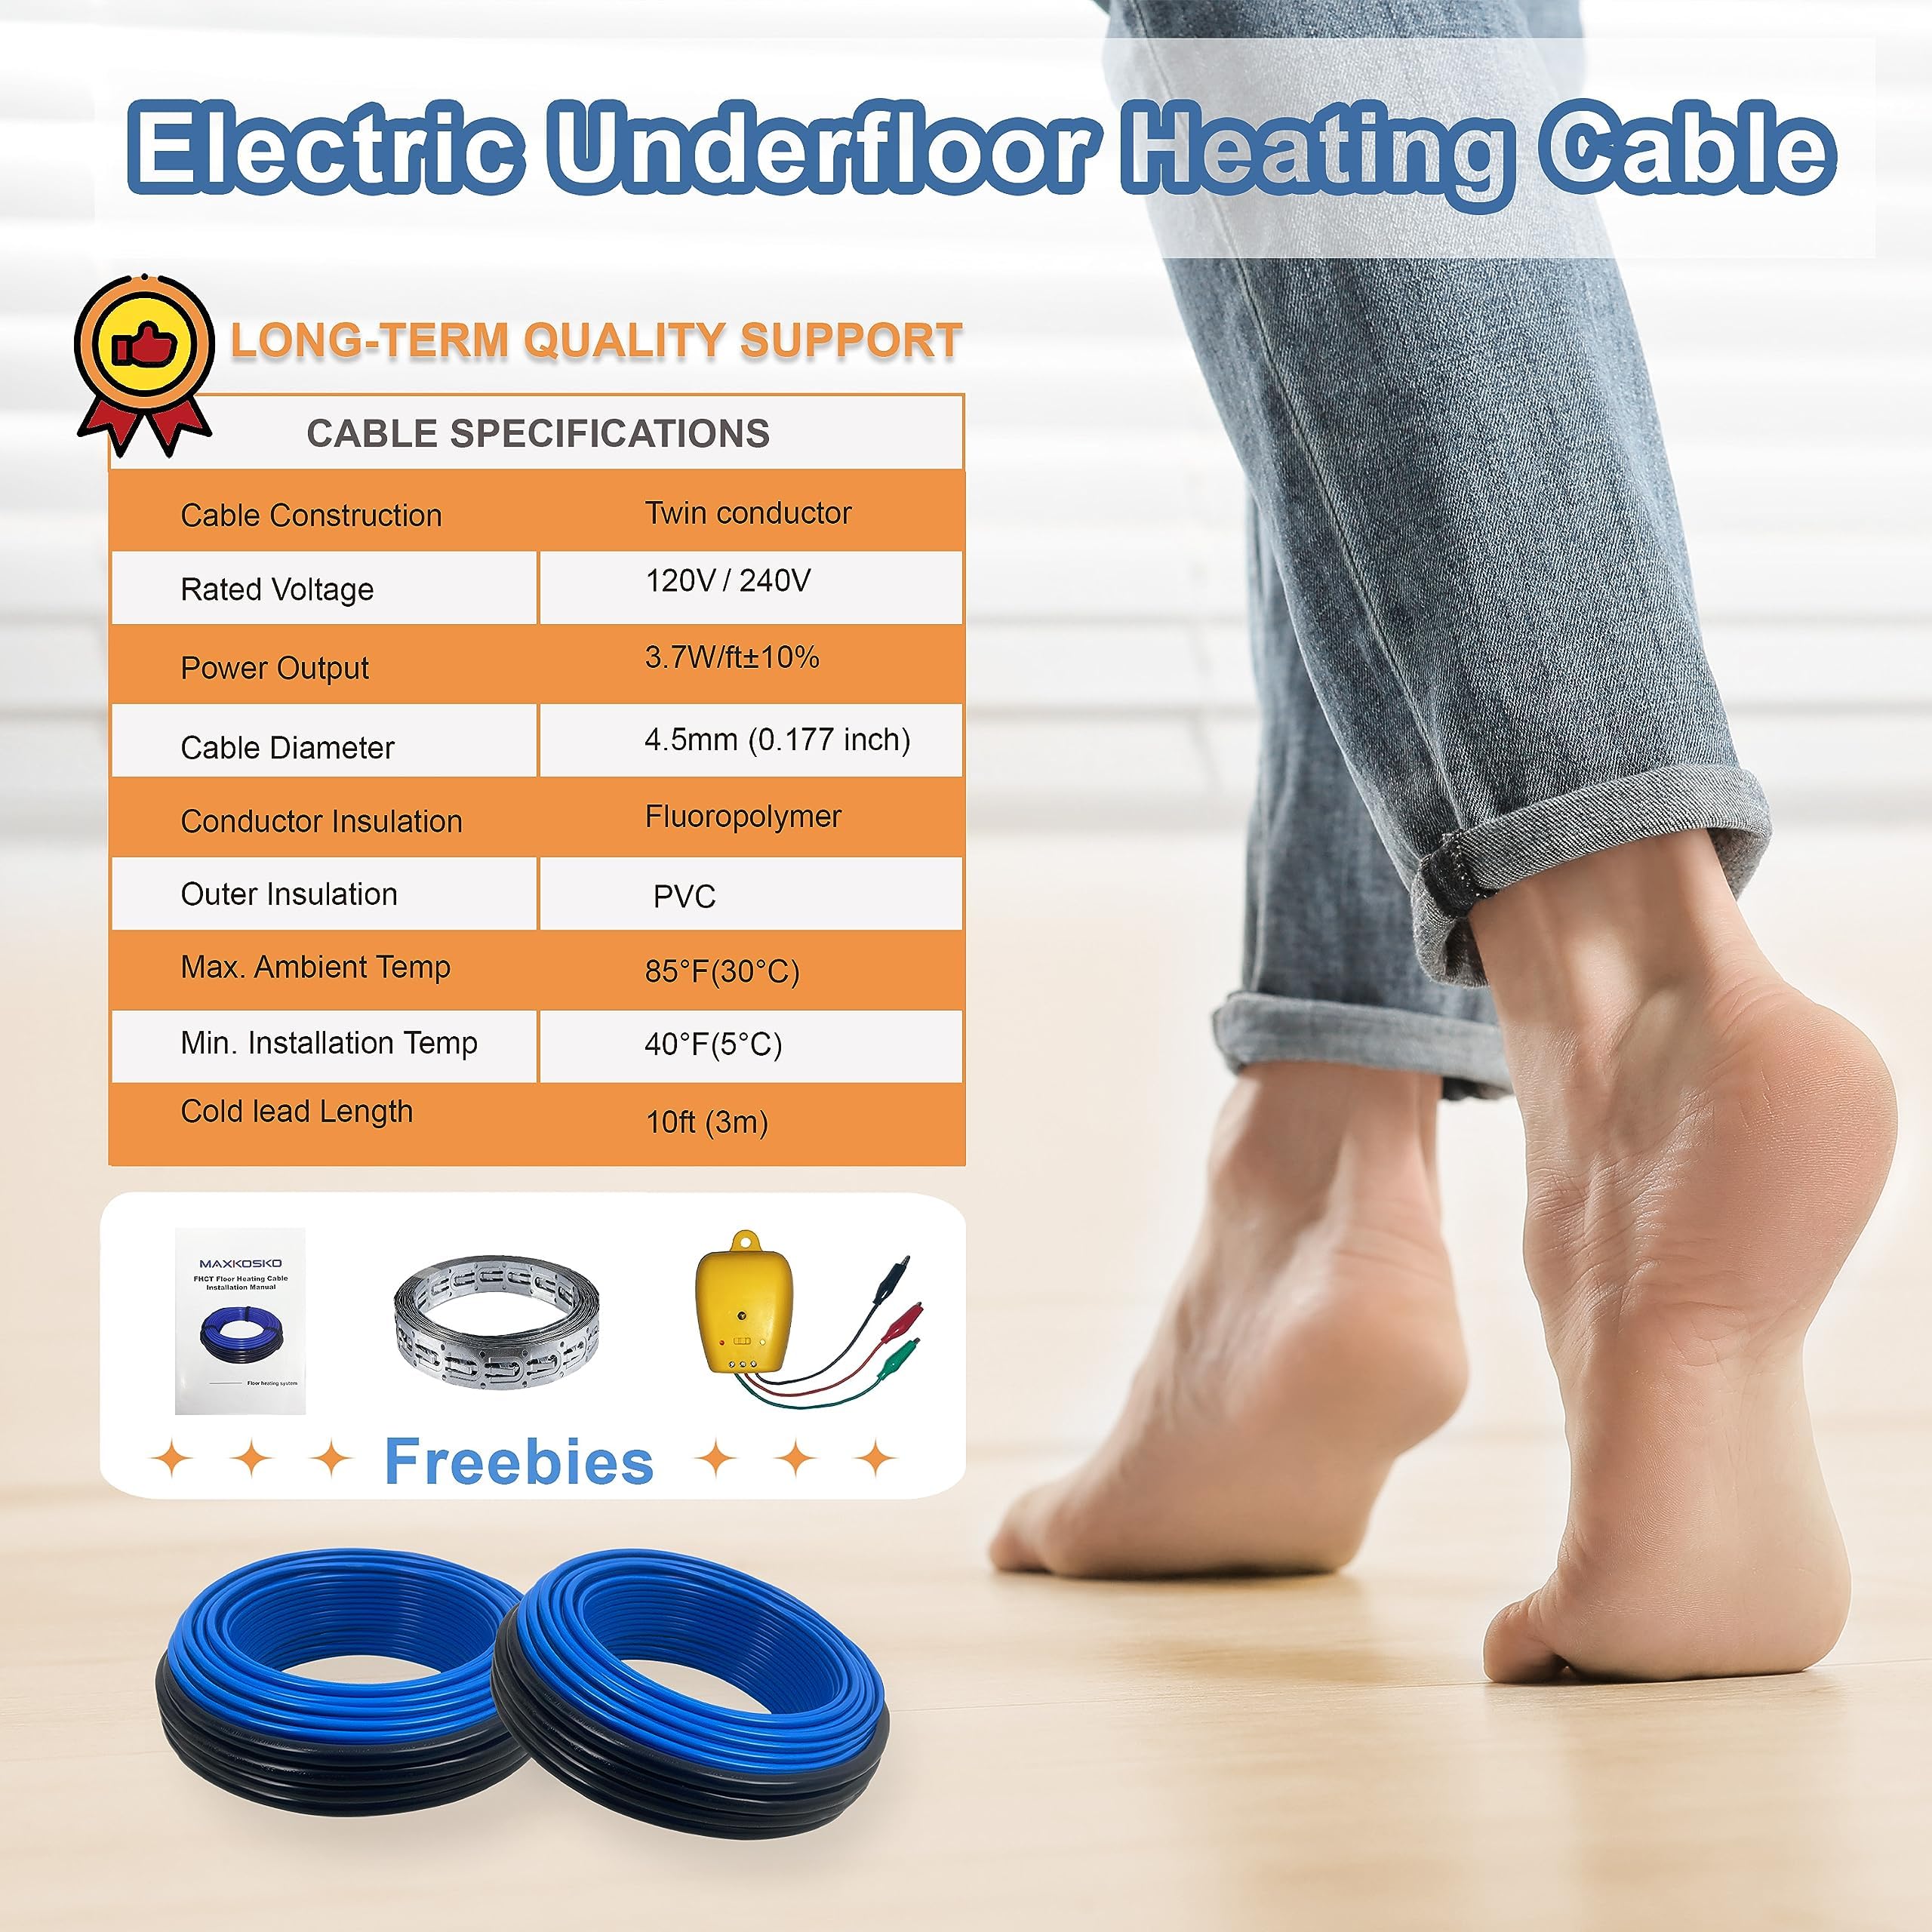 Electric Heated Floor Cable Underfloor Heating System Kit with Cable Guide，Alarm Monitor for Indoor Installation 120V,10 Sqft